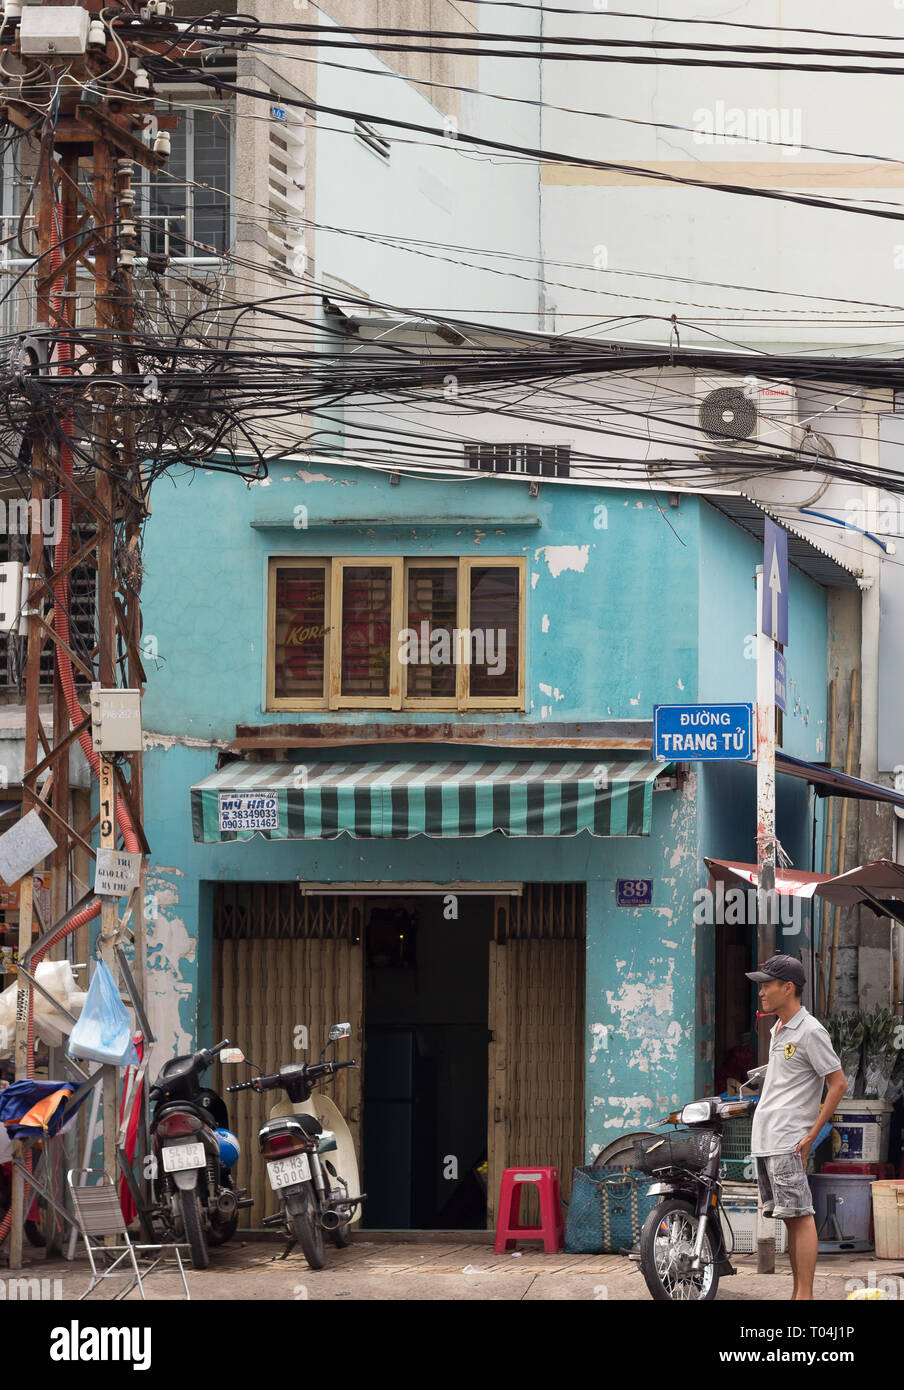 man standing near weathered house facade on street in Vietnam Stock Photo